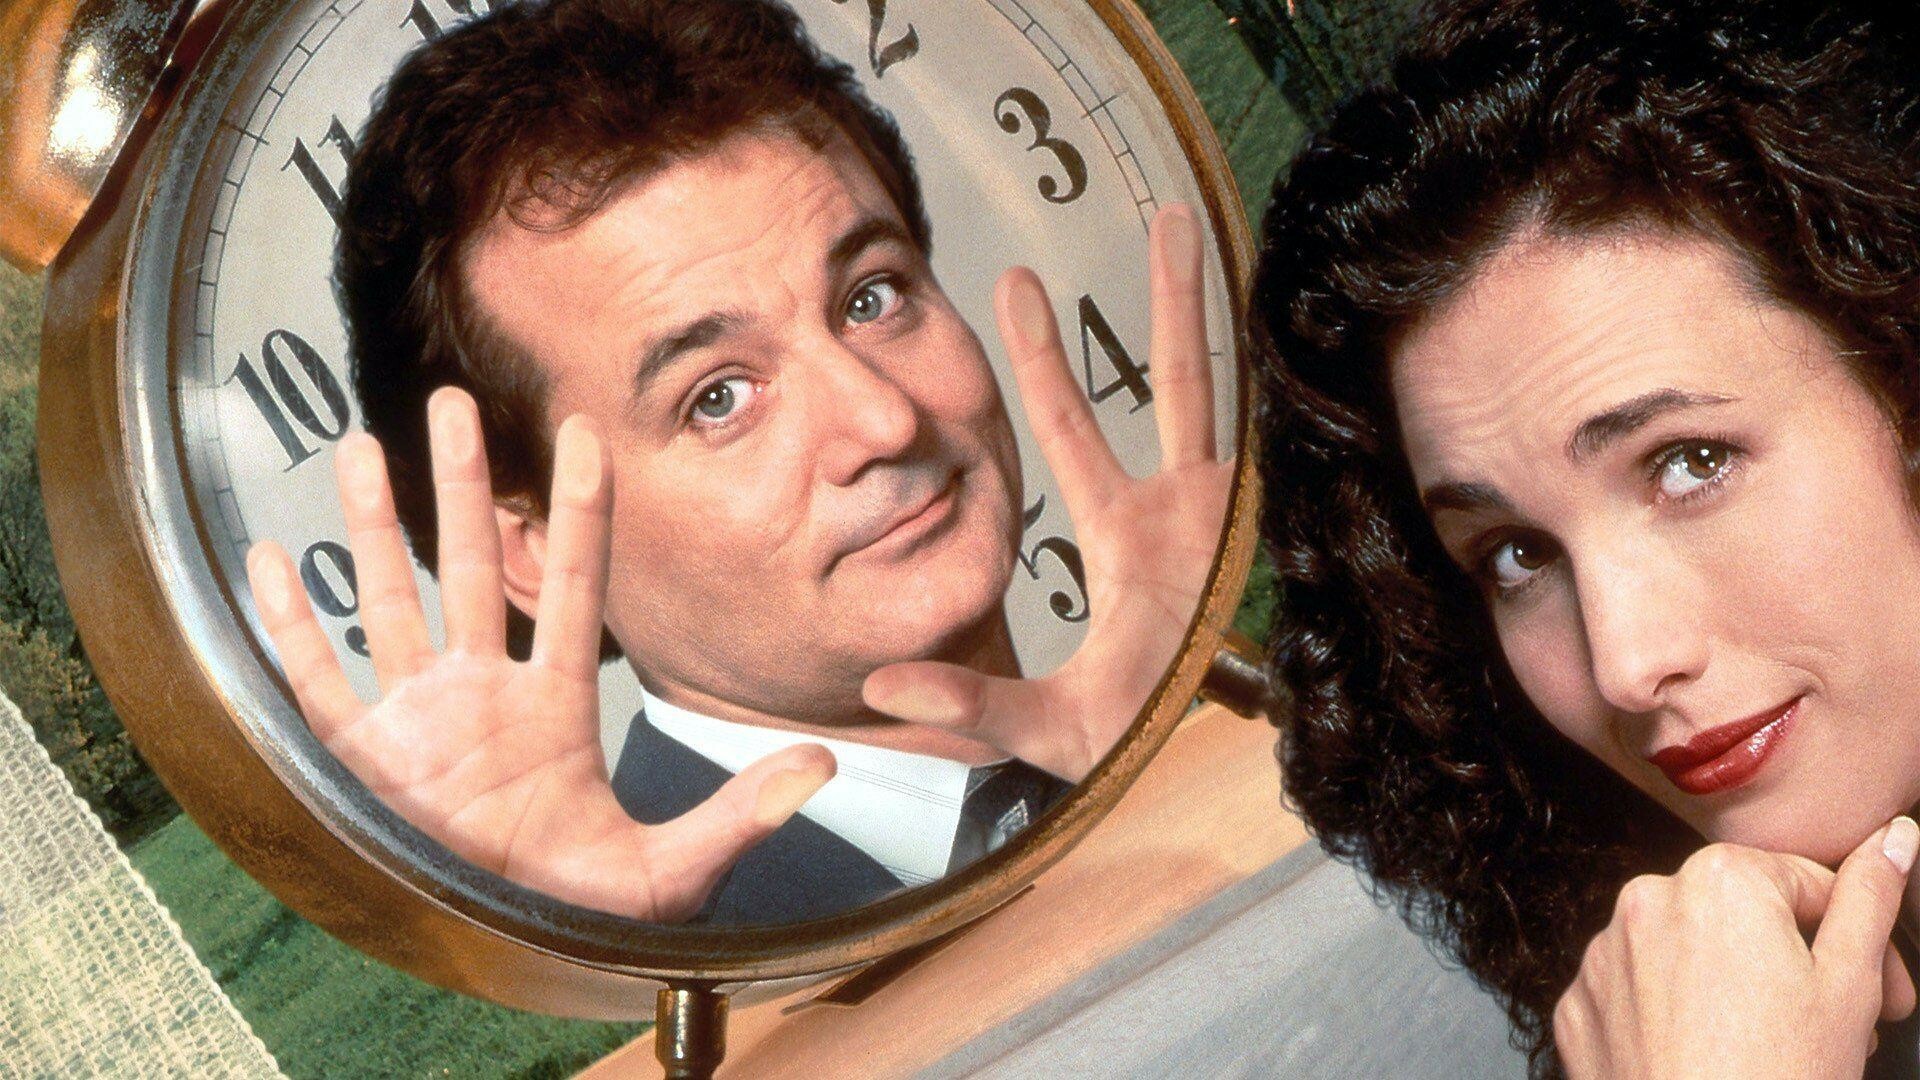 Groundhog Day (Holiday): A romantic-comedy film, A man trapped in a time loop, reliving February 2 repeatedly. 1920x1080 Full HD Wallpaper.